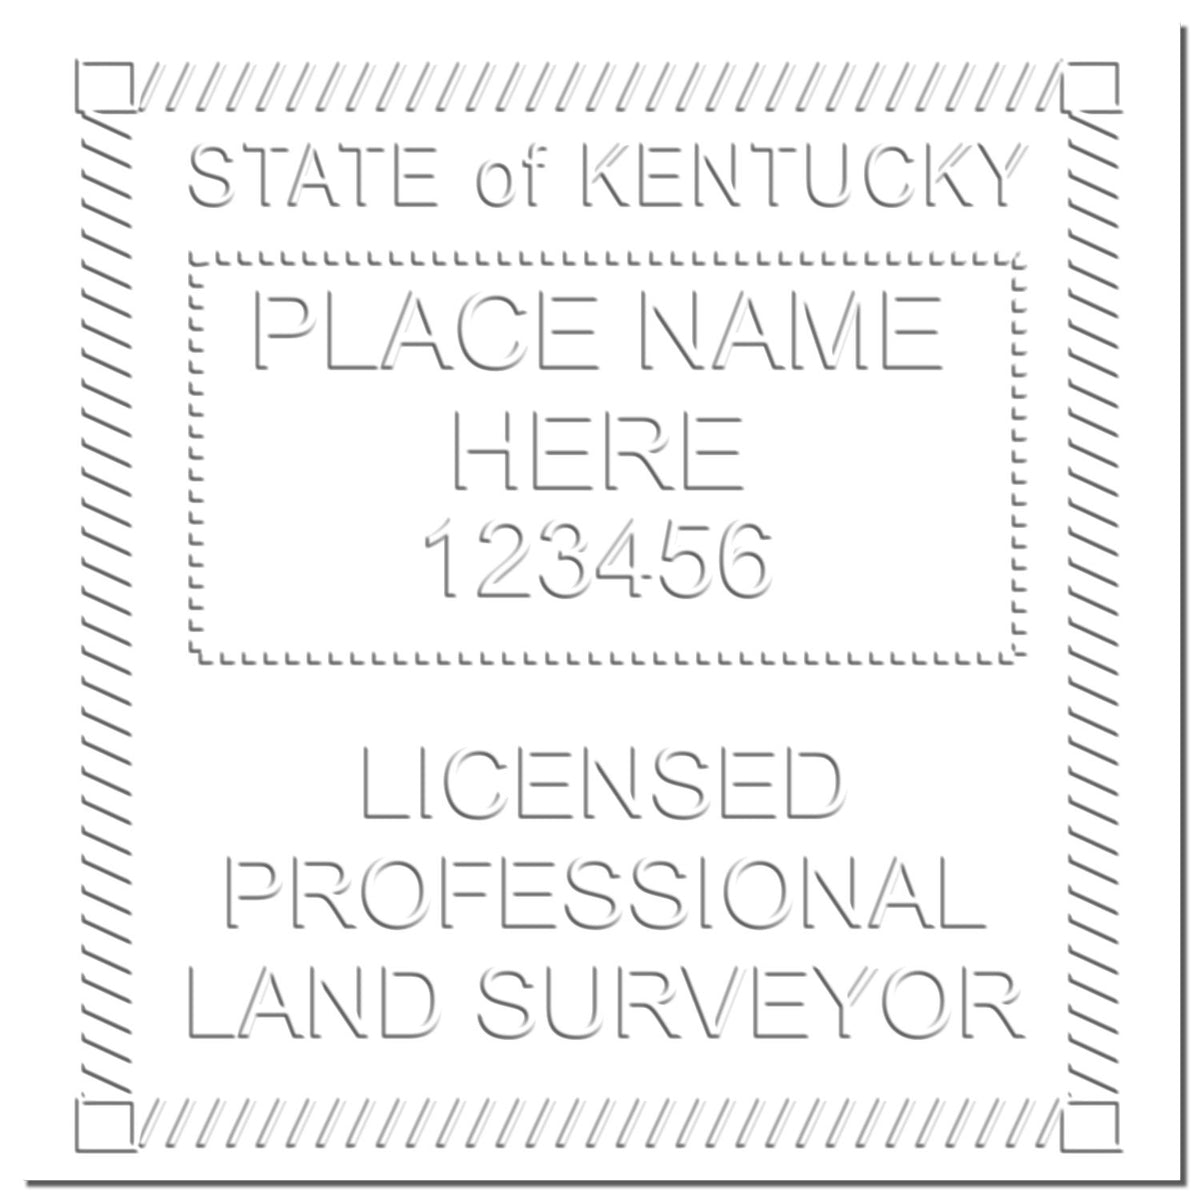 This paper is stamped with a sample imprint of the Gift Kentucky Land Surveyor Seal, signifying its quality and reliability.